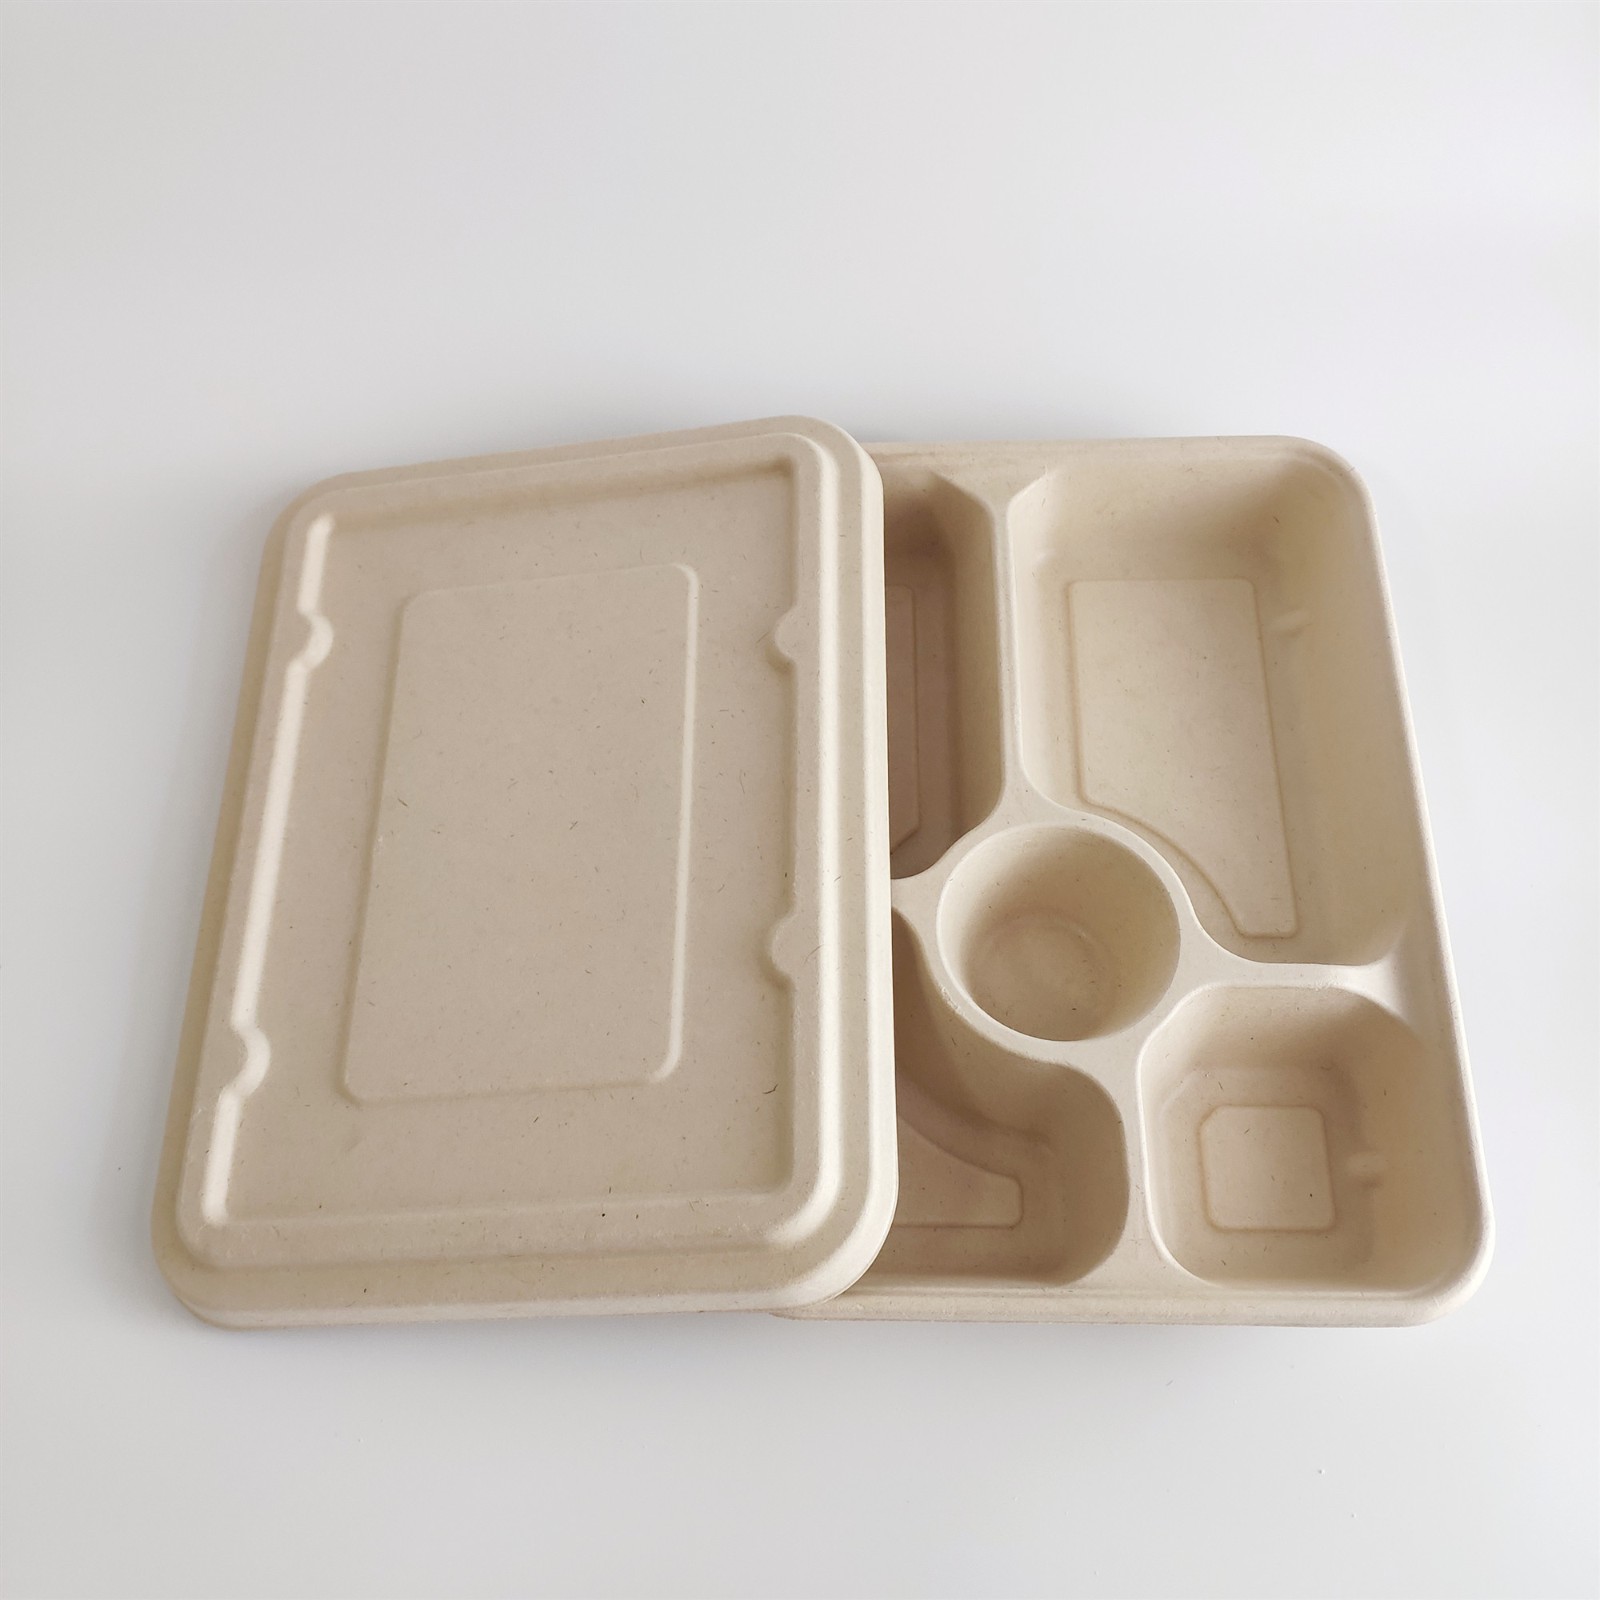 4 Compartments Food Tray With Lids Natural Color Sugarcane Material Natural Color